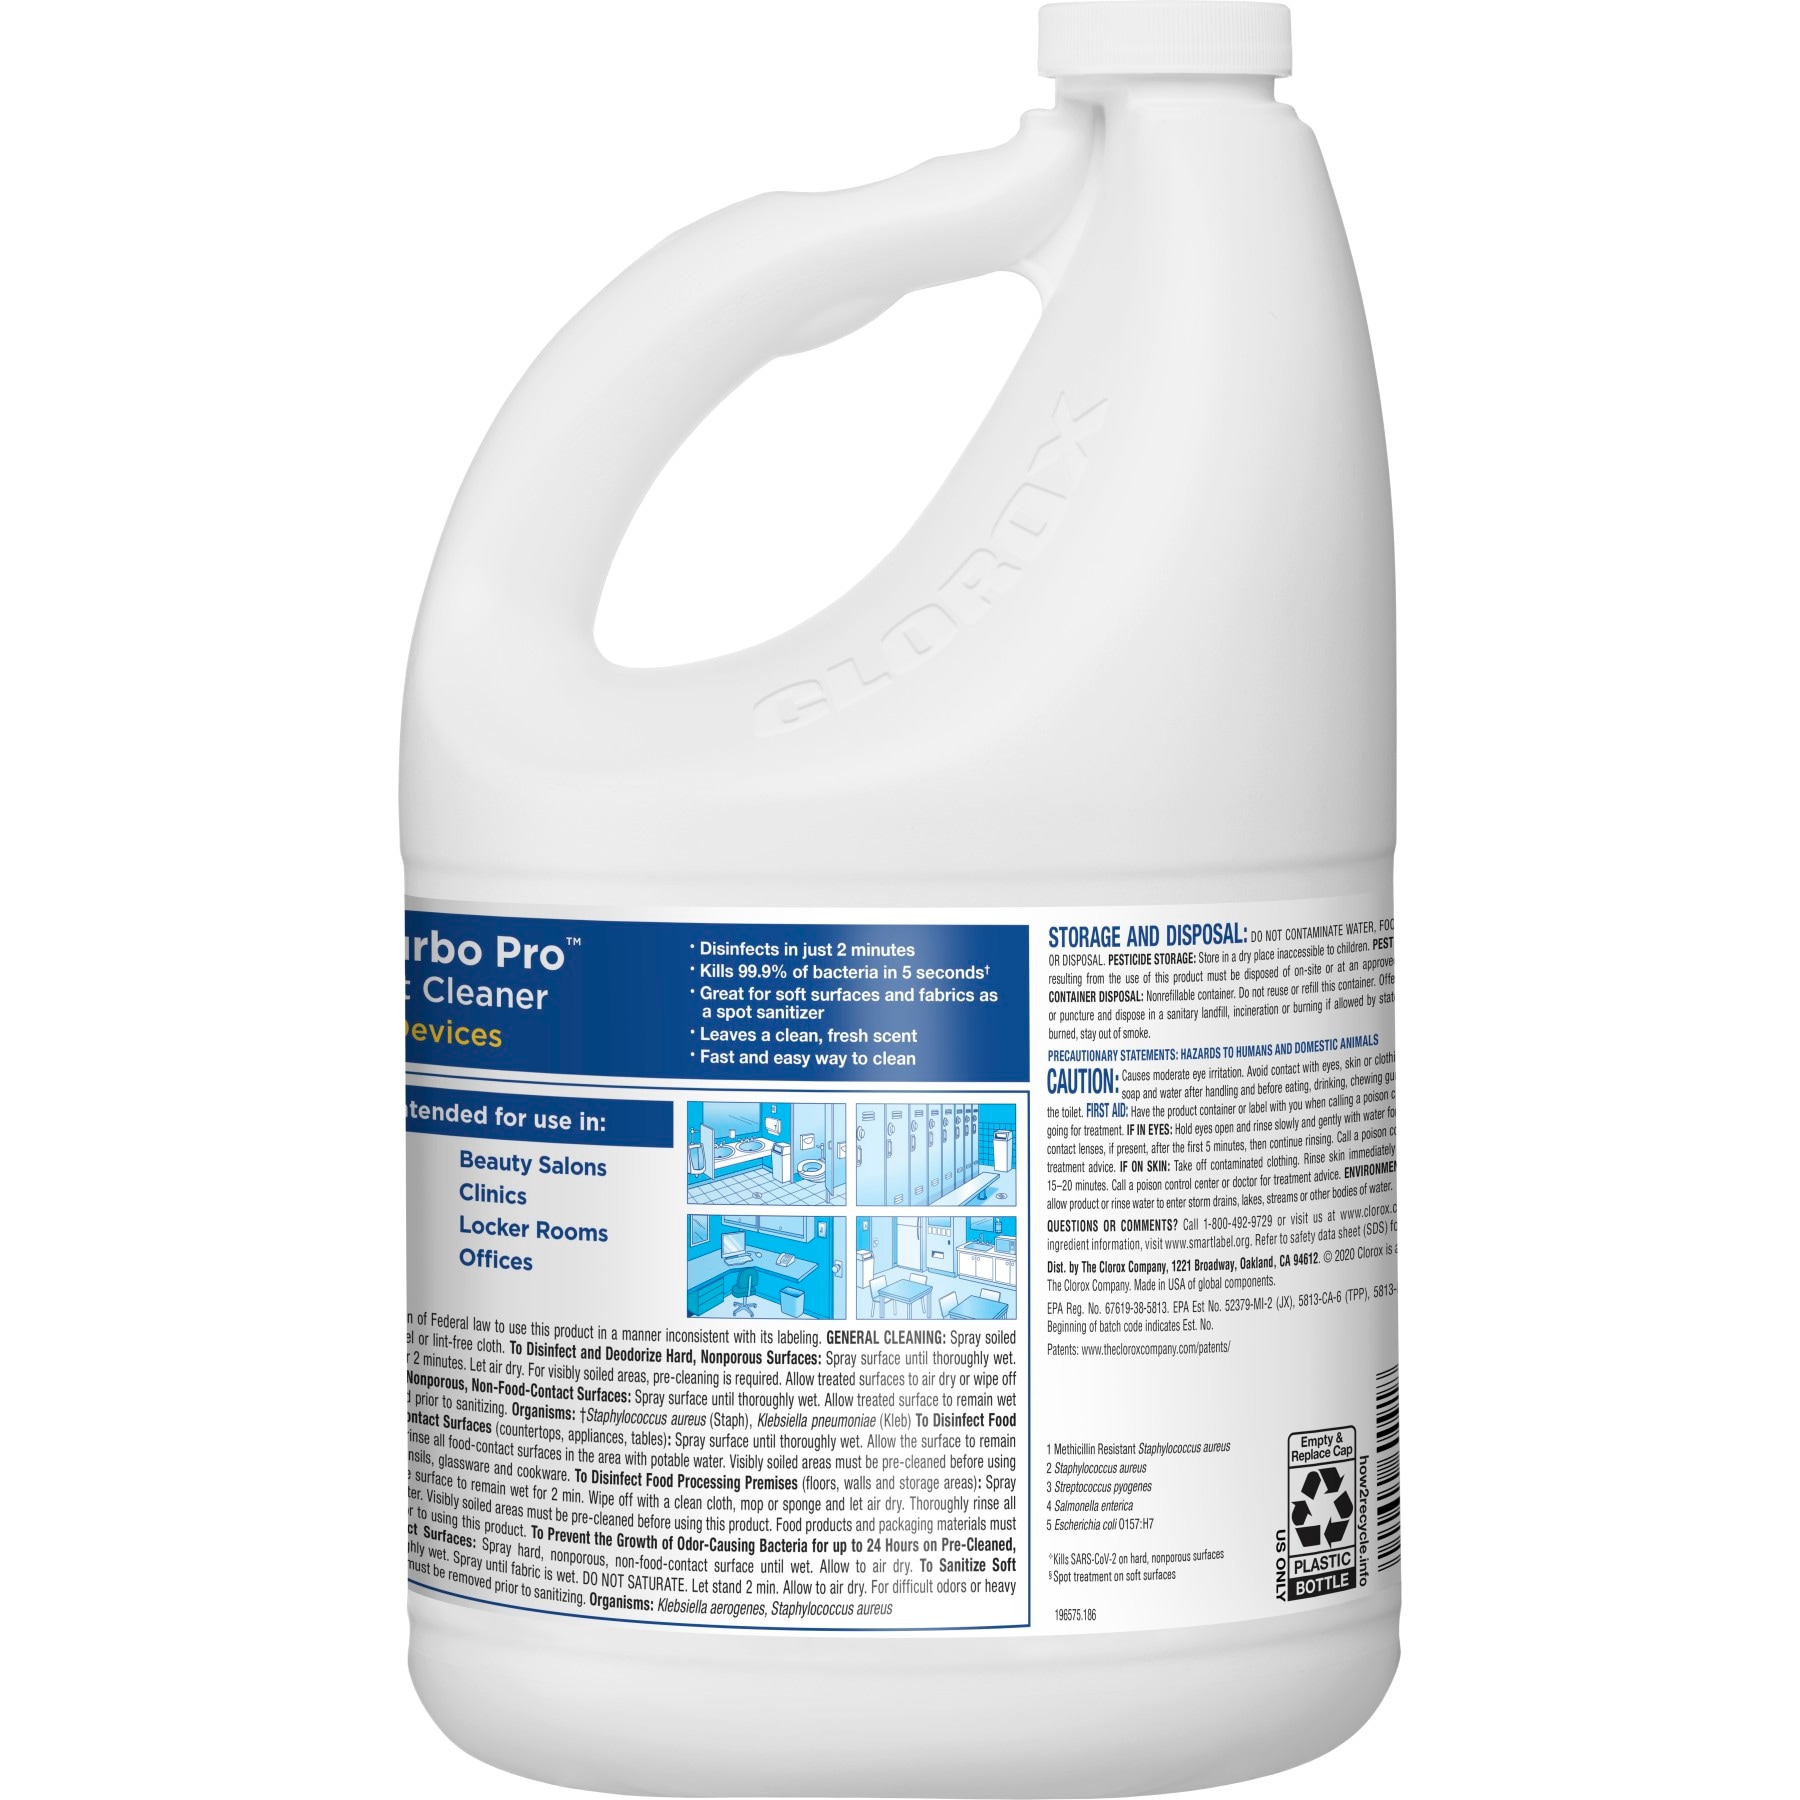  CloroxPro Turbo Pro Disinfectant Cleaner for Sprayer Devices,  Bleach-Free Healthcare Cleaning and Industrial Cleaning, Kills Cold and Flu  Viruses, 121 Fl. Oz. (Pack of 3) - 60091 : Health & Household